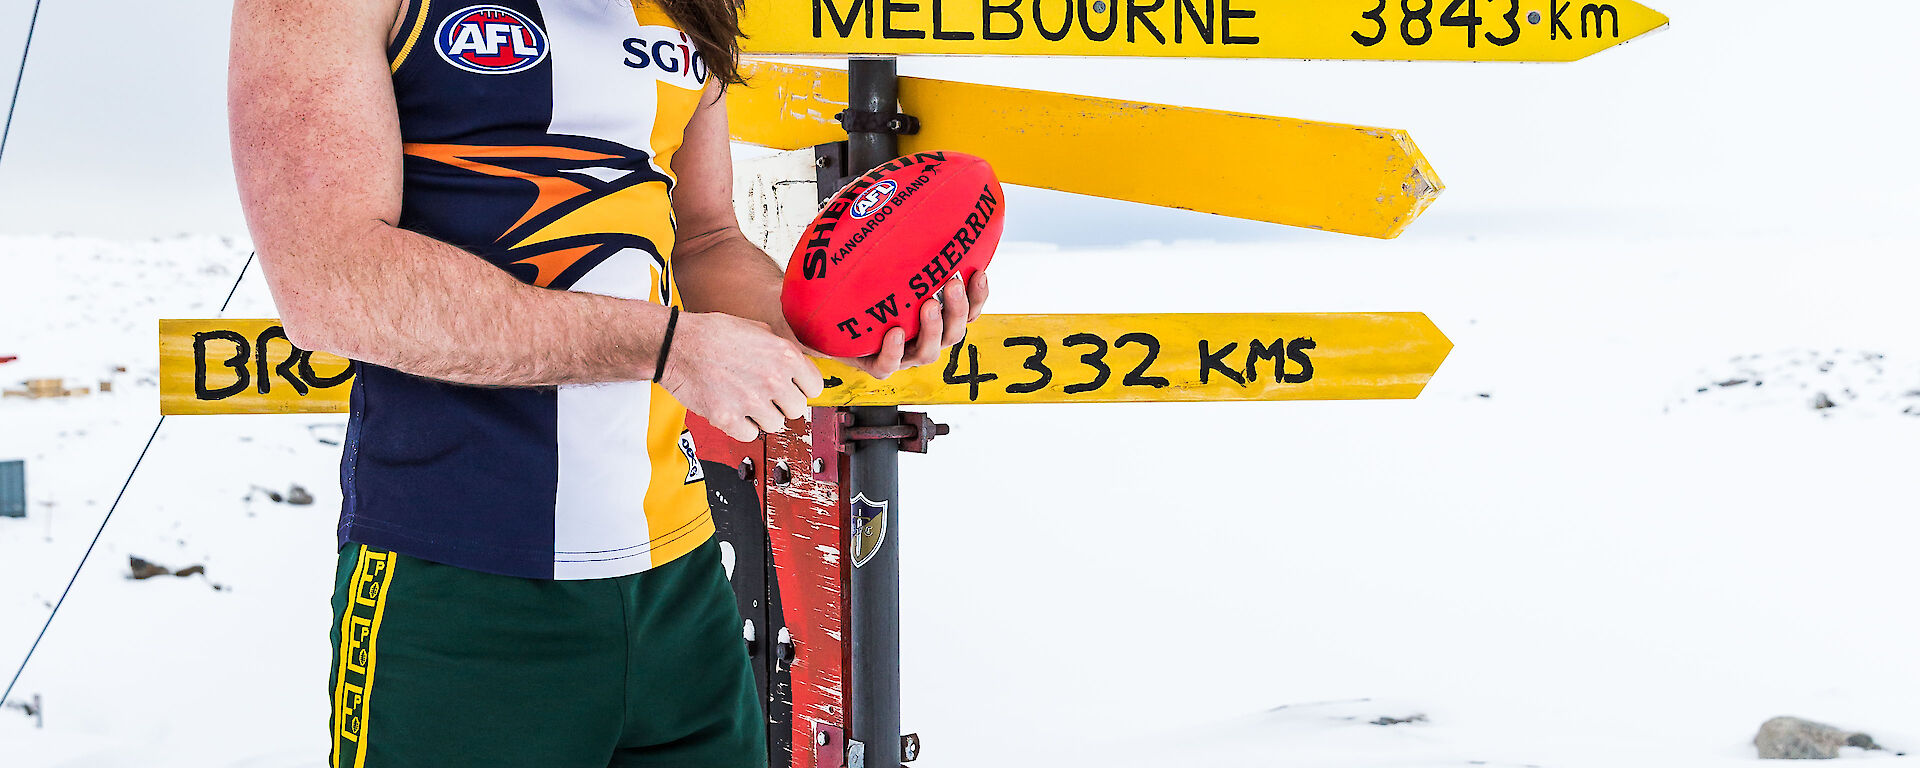 Man stands in AFL top and short in big boots and beanie and holding football beside Casey sign that indicates Melbourne is 3843km away